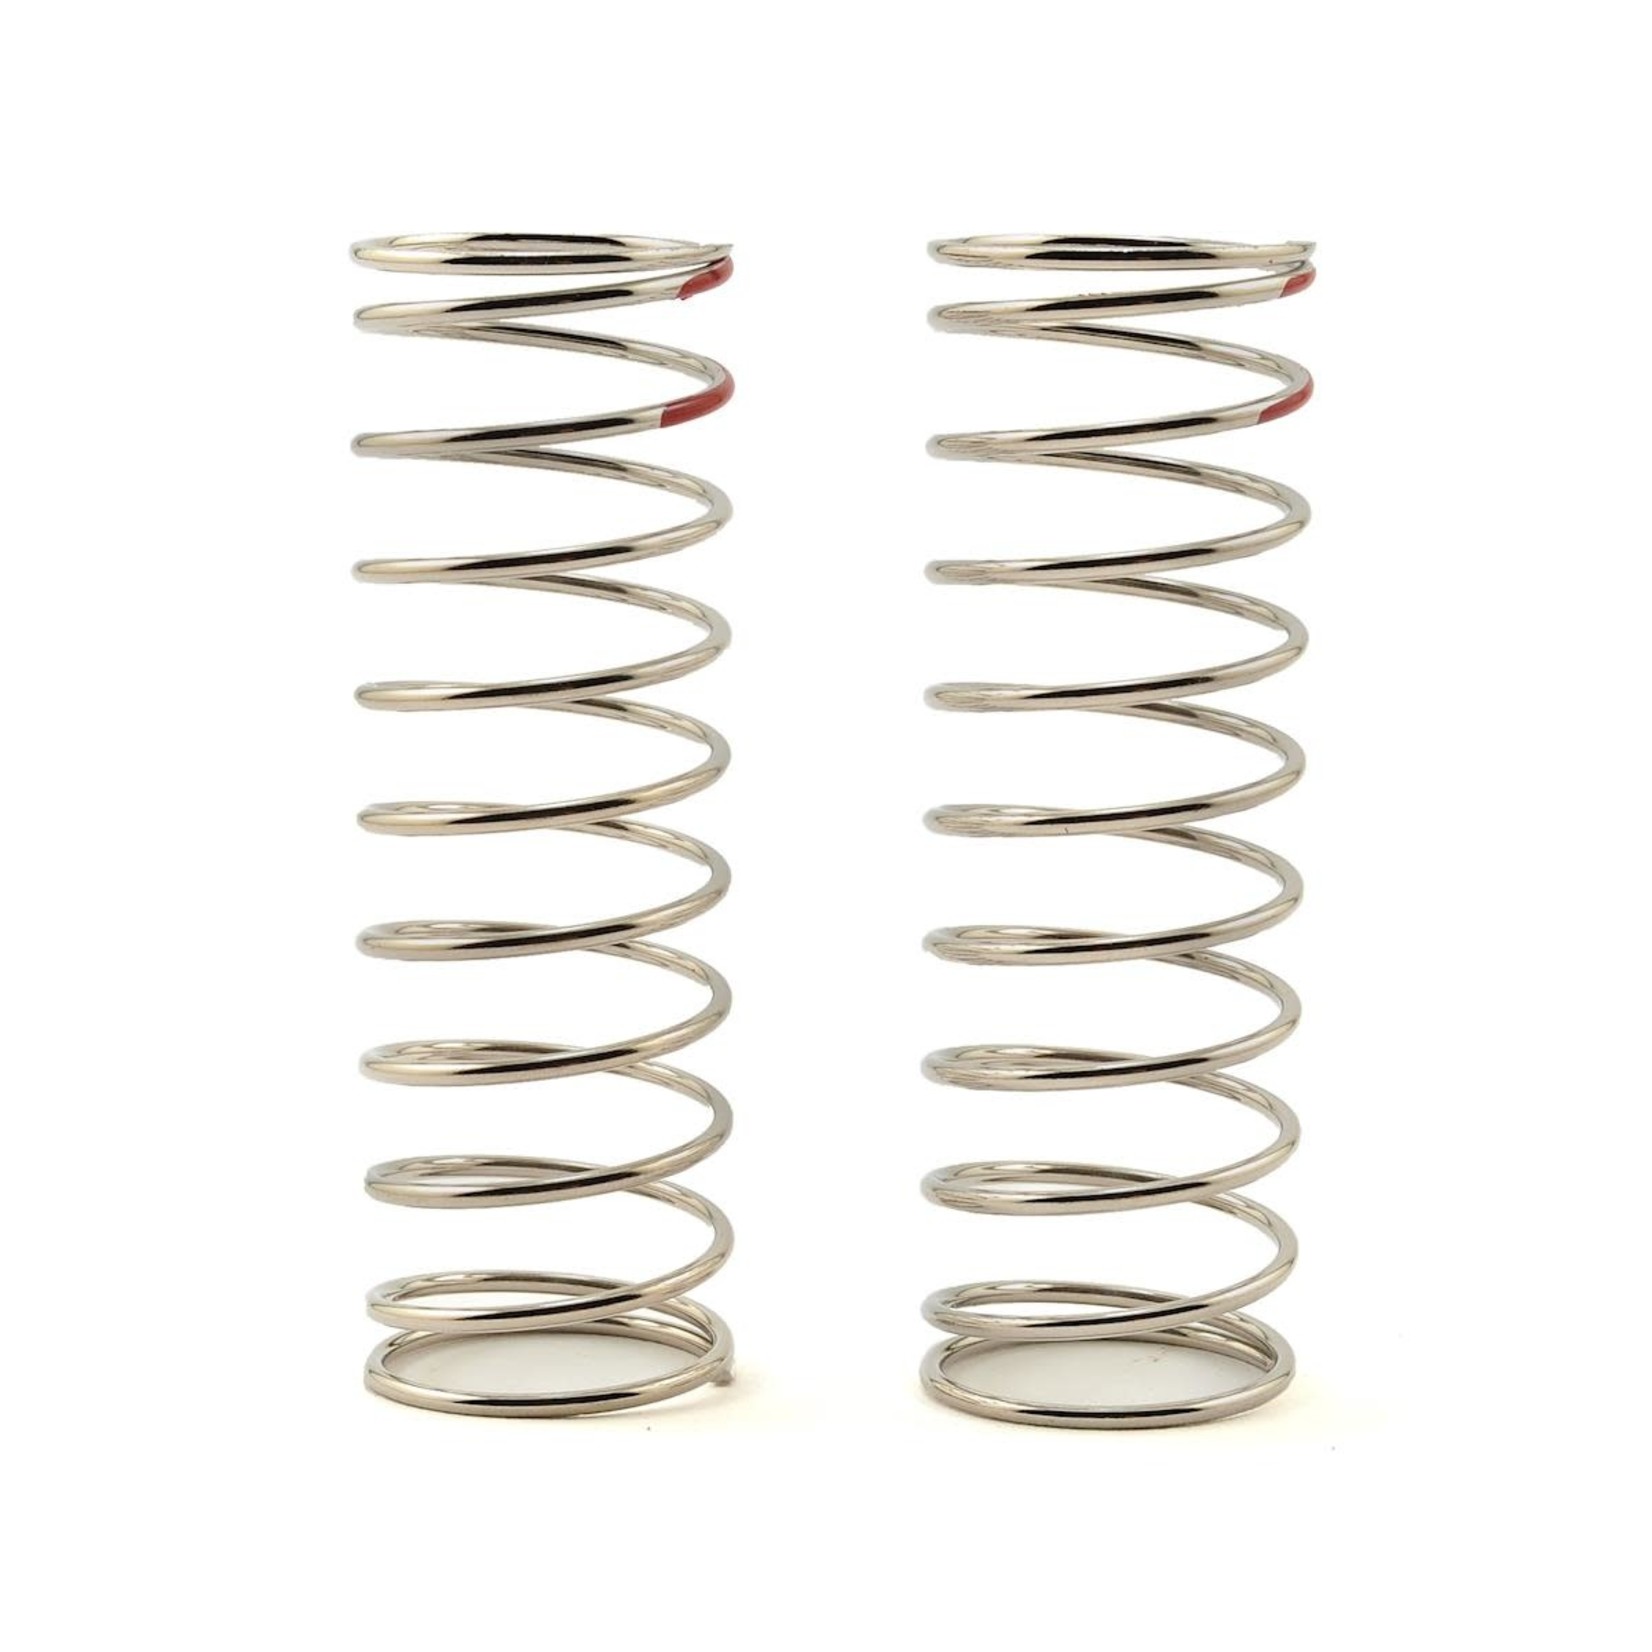 Tekno RC Tekno RC Low Frequency 70mm Rear Shock Spring Set (Red - 2.98lb/in) (1.5x11.0) #TKR6117